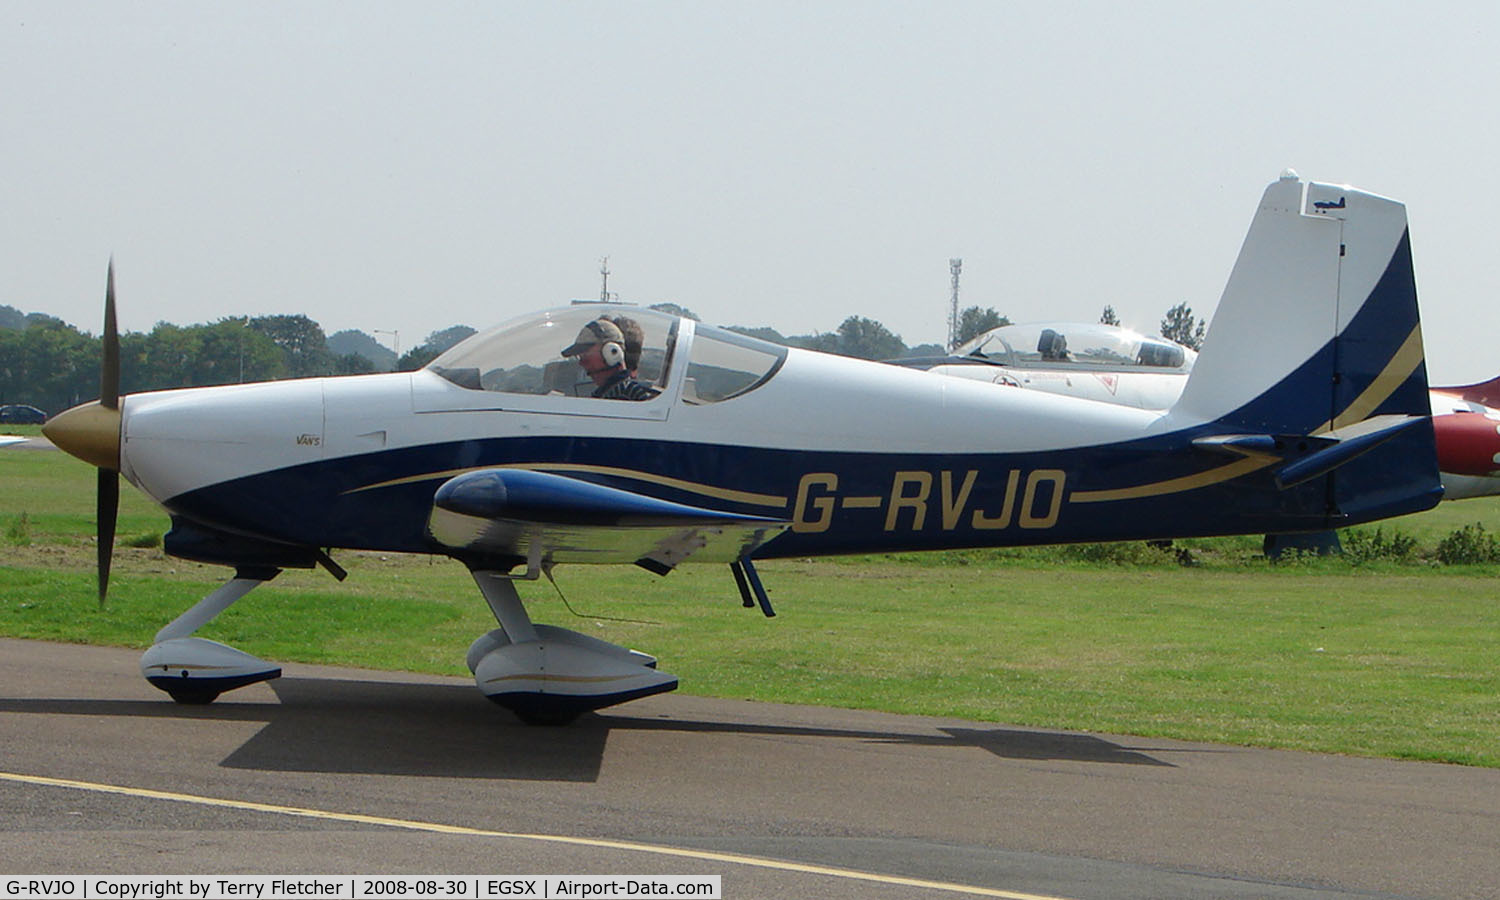 G-RVJO, 2007 Vans RV-9A C/N PFA 320-13778, Participant in the 2008 RV Fly-in at North Weald Uk